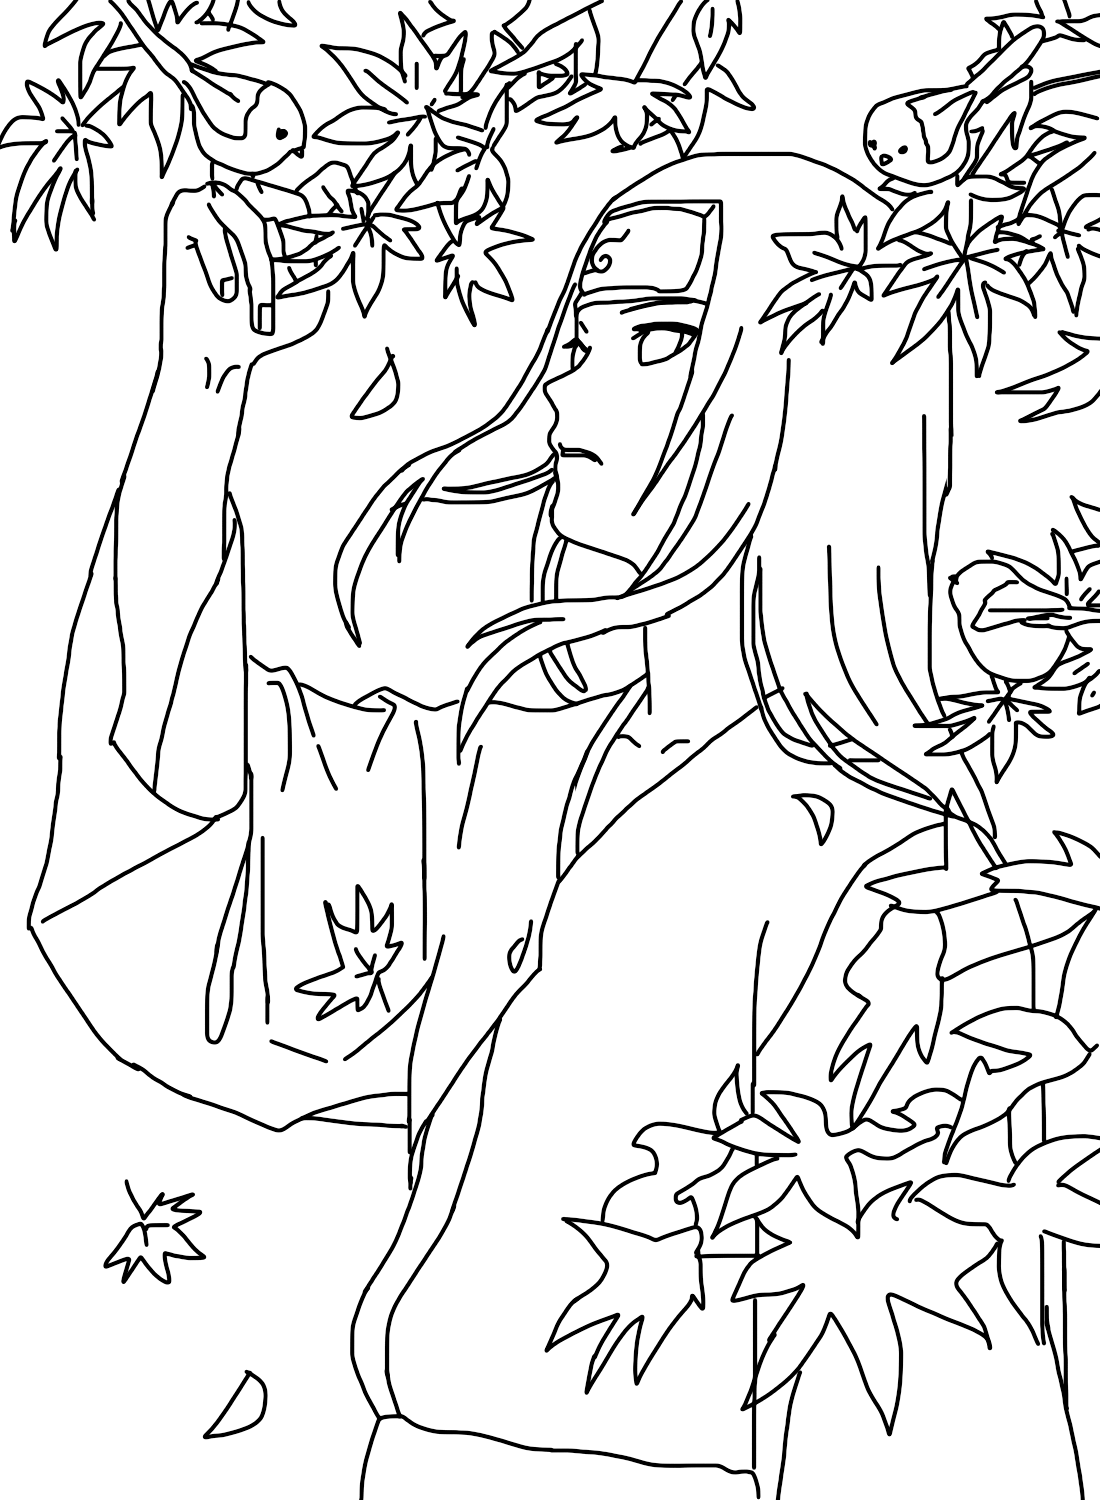 Neji from Naruto Coloring Page from Neji